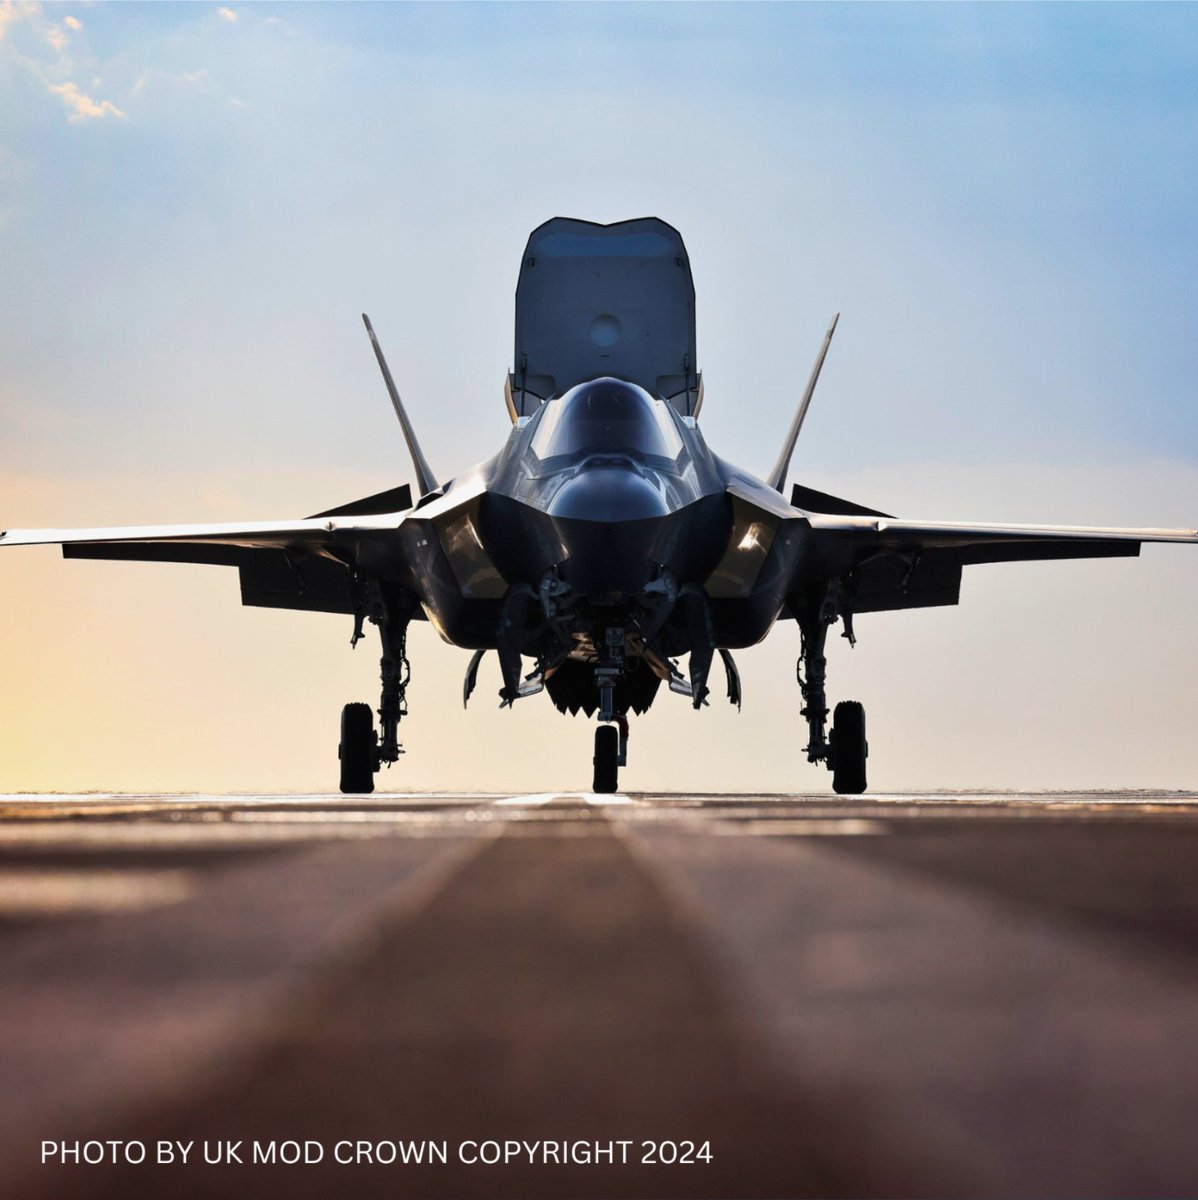 The numbers speak for themselves. ✅ 811,000+ flight hours ✅ 486,000+ sorties ✅ 519+ detachments & deployments completed. The F-35 is delivering today. lmt.co/3TPPpK1